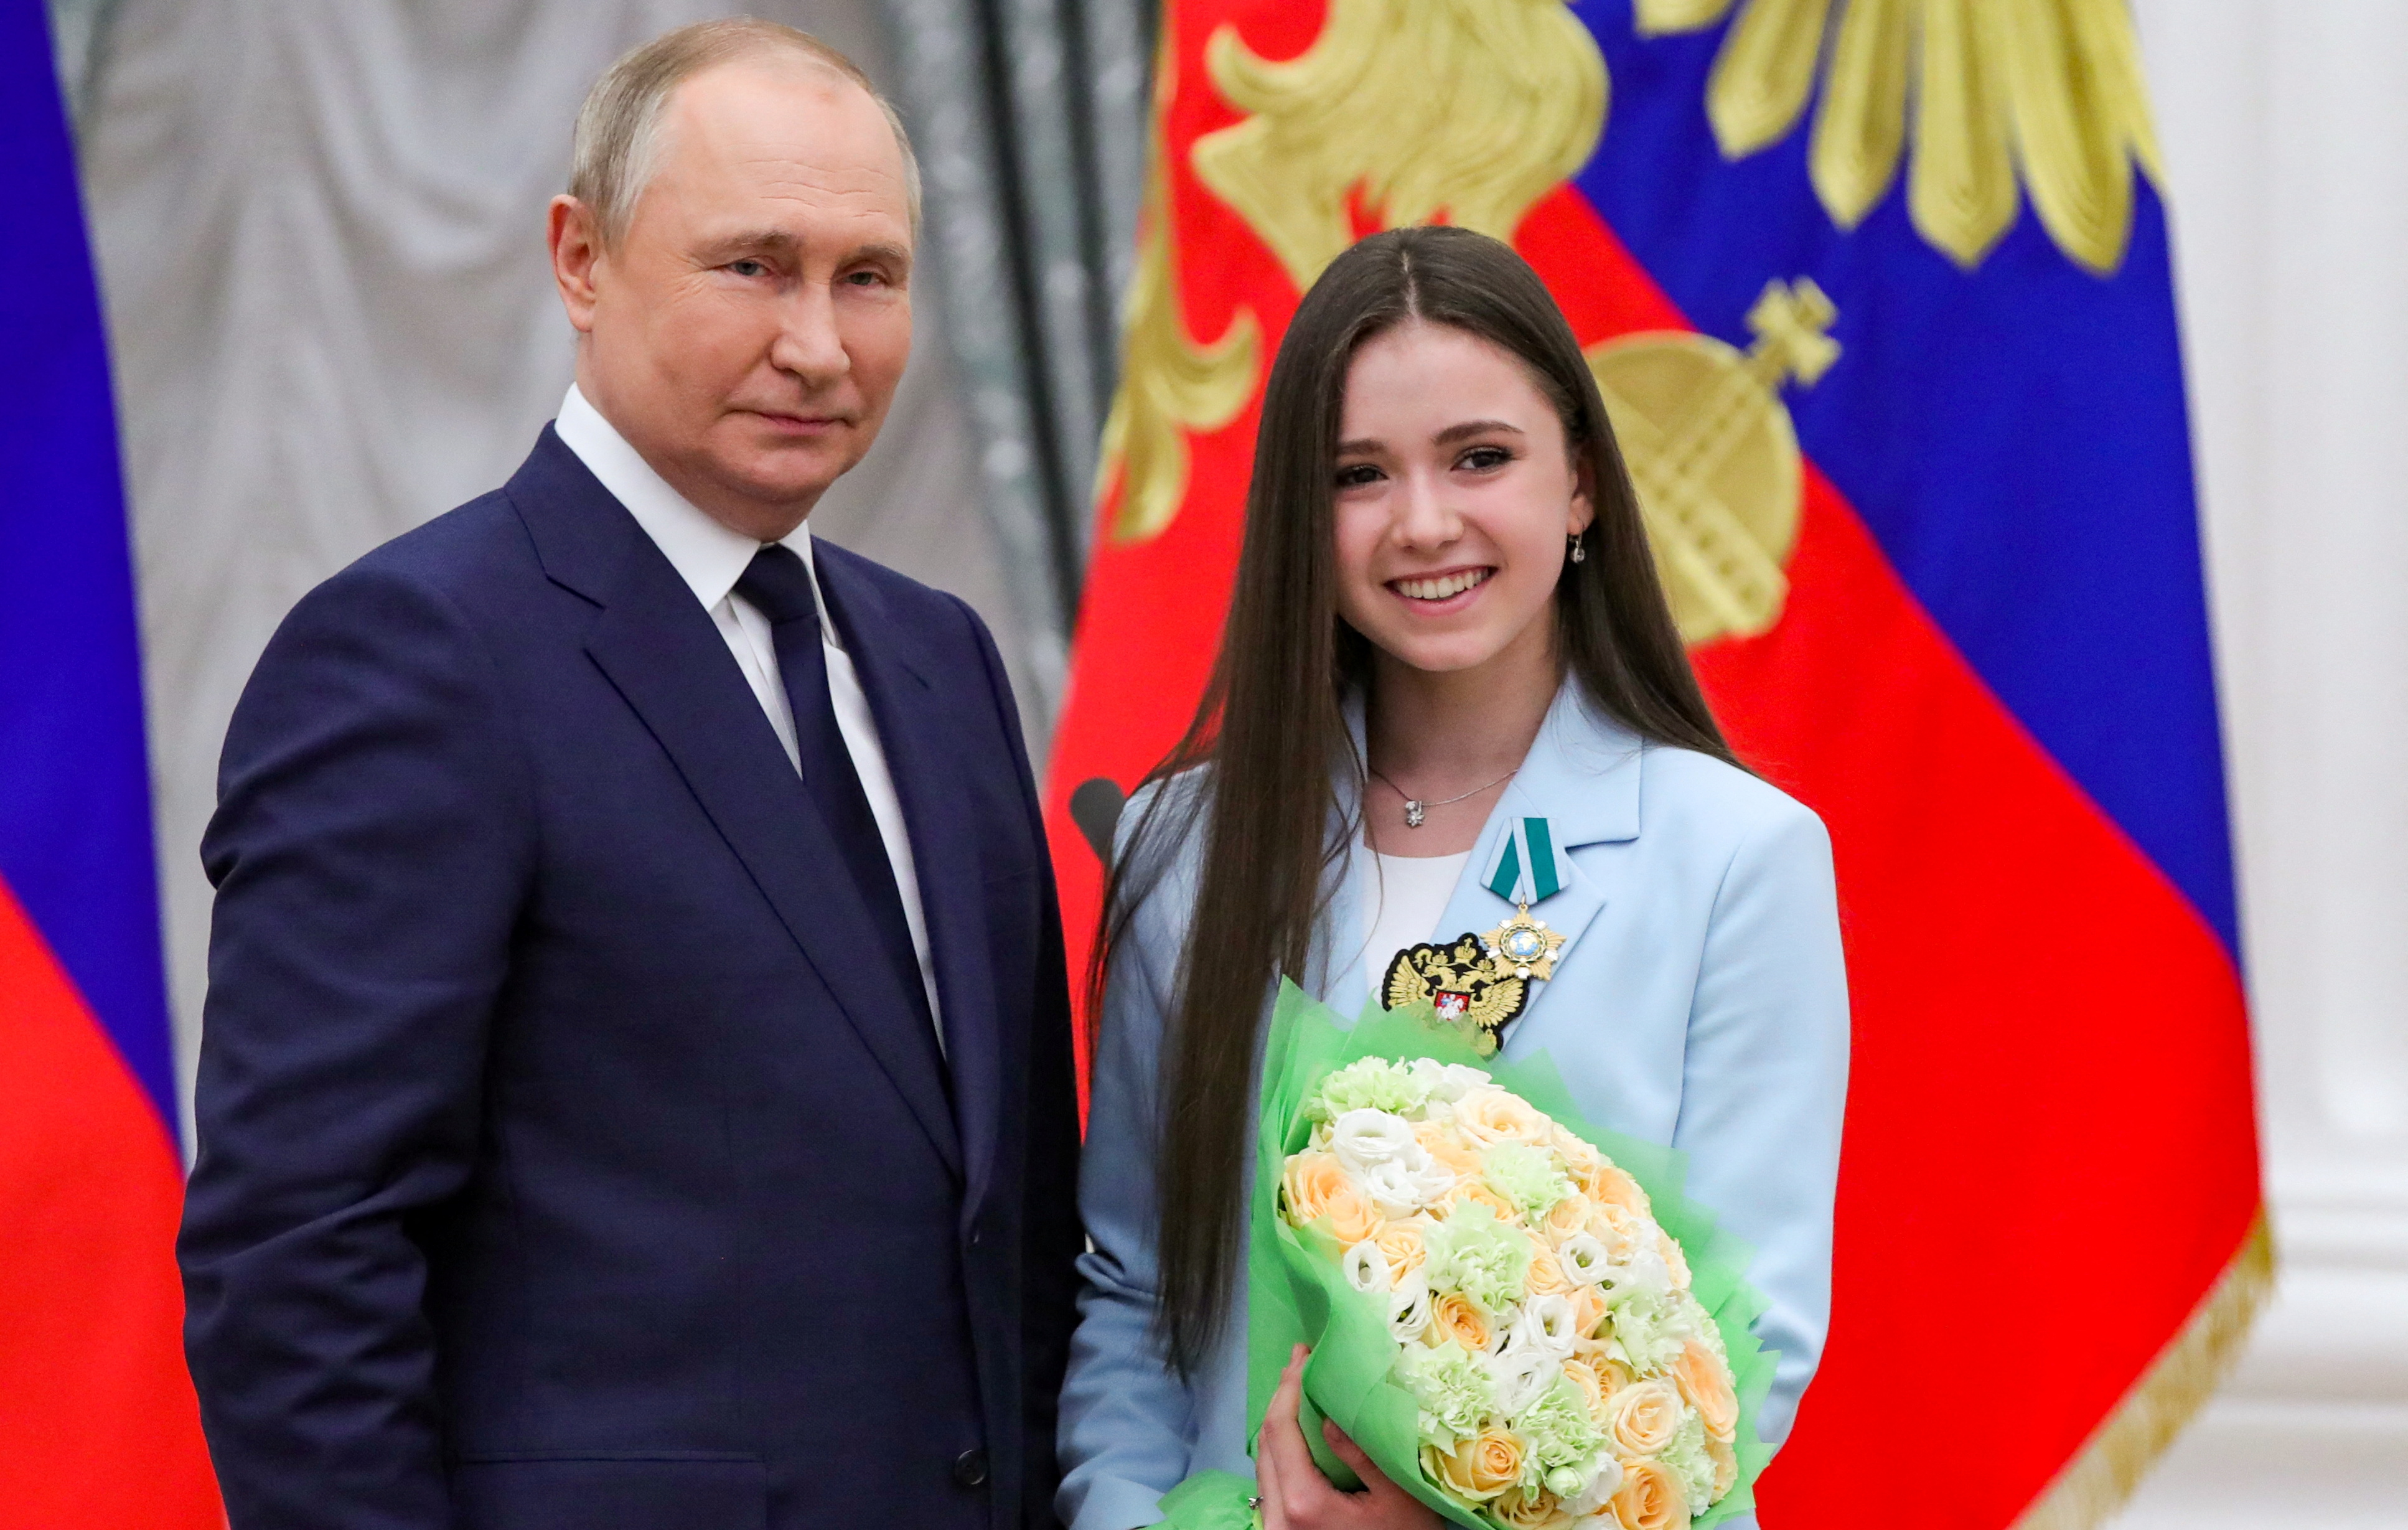 Russian President Putin meets with Olympians in Moscow